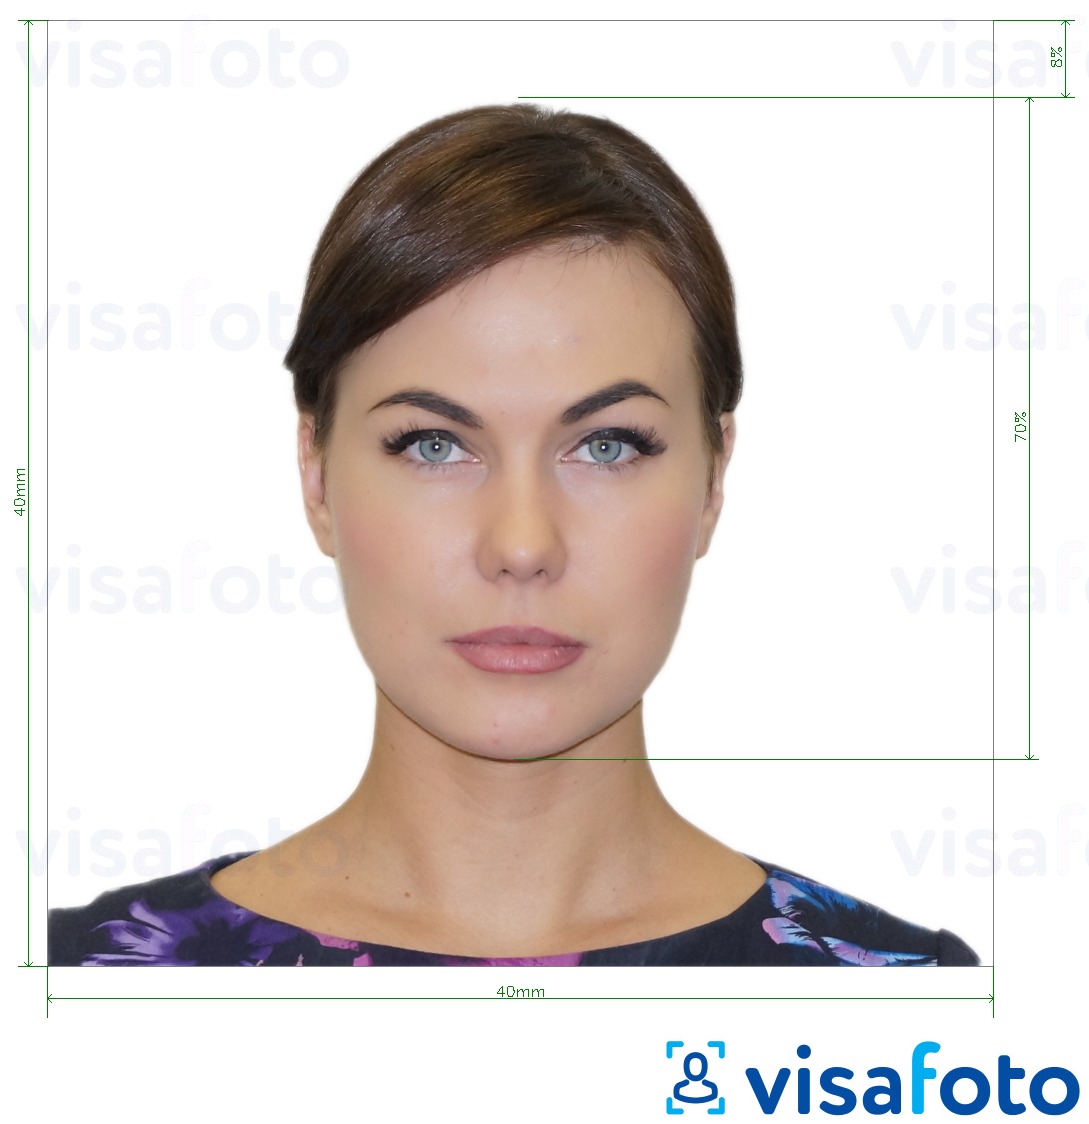 Example of photo for Argentina visa 4x4 cm (40x40 mm) with exact size specification